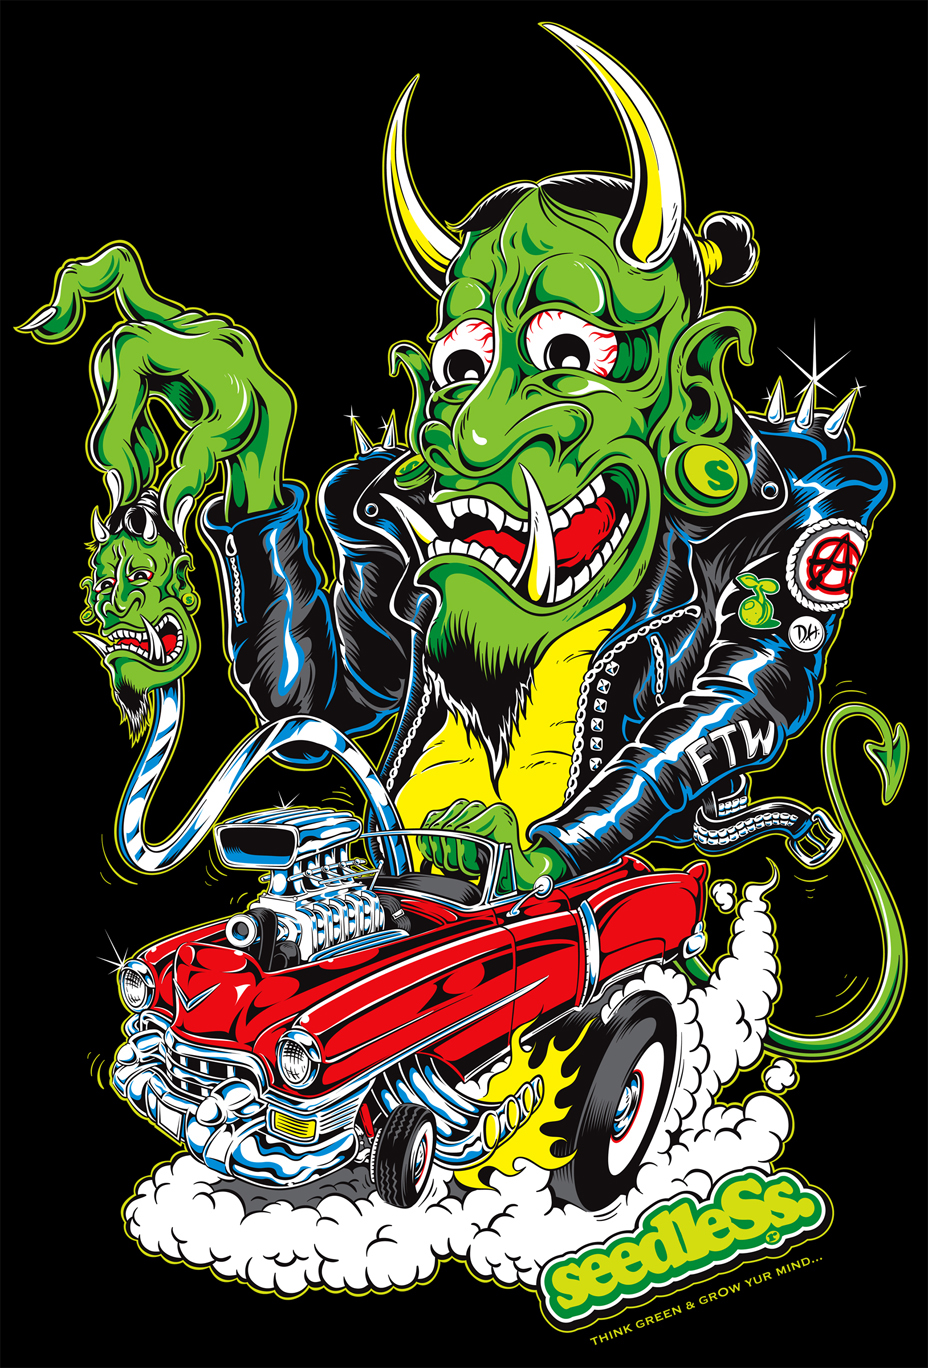 Digital Artwork lowbrow seedless seedless clothing Illustrator DH Dane Holmquist cannabis cup monster Blood and Guts Flying Eye DH cannabis art DH Art Art by DH DH Poster Art